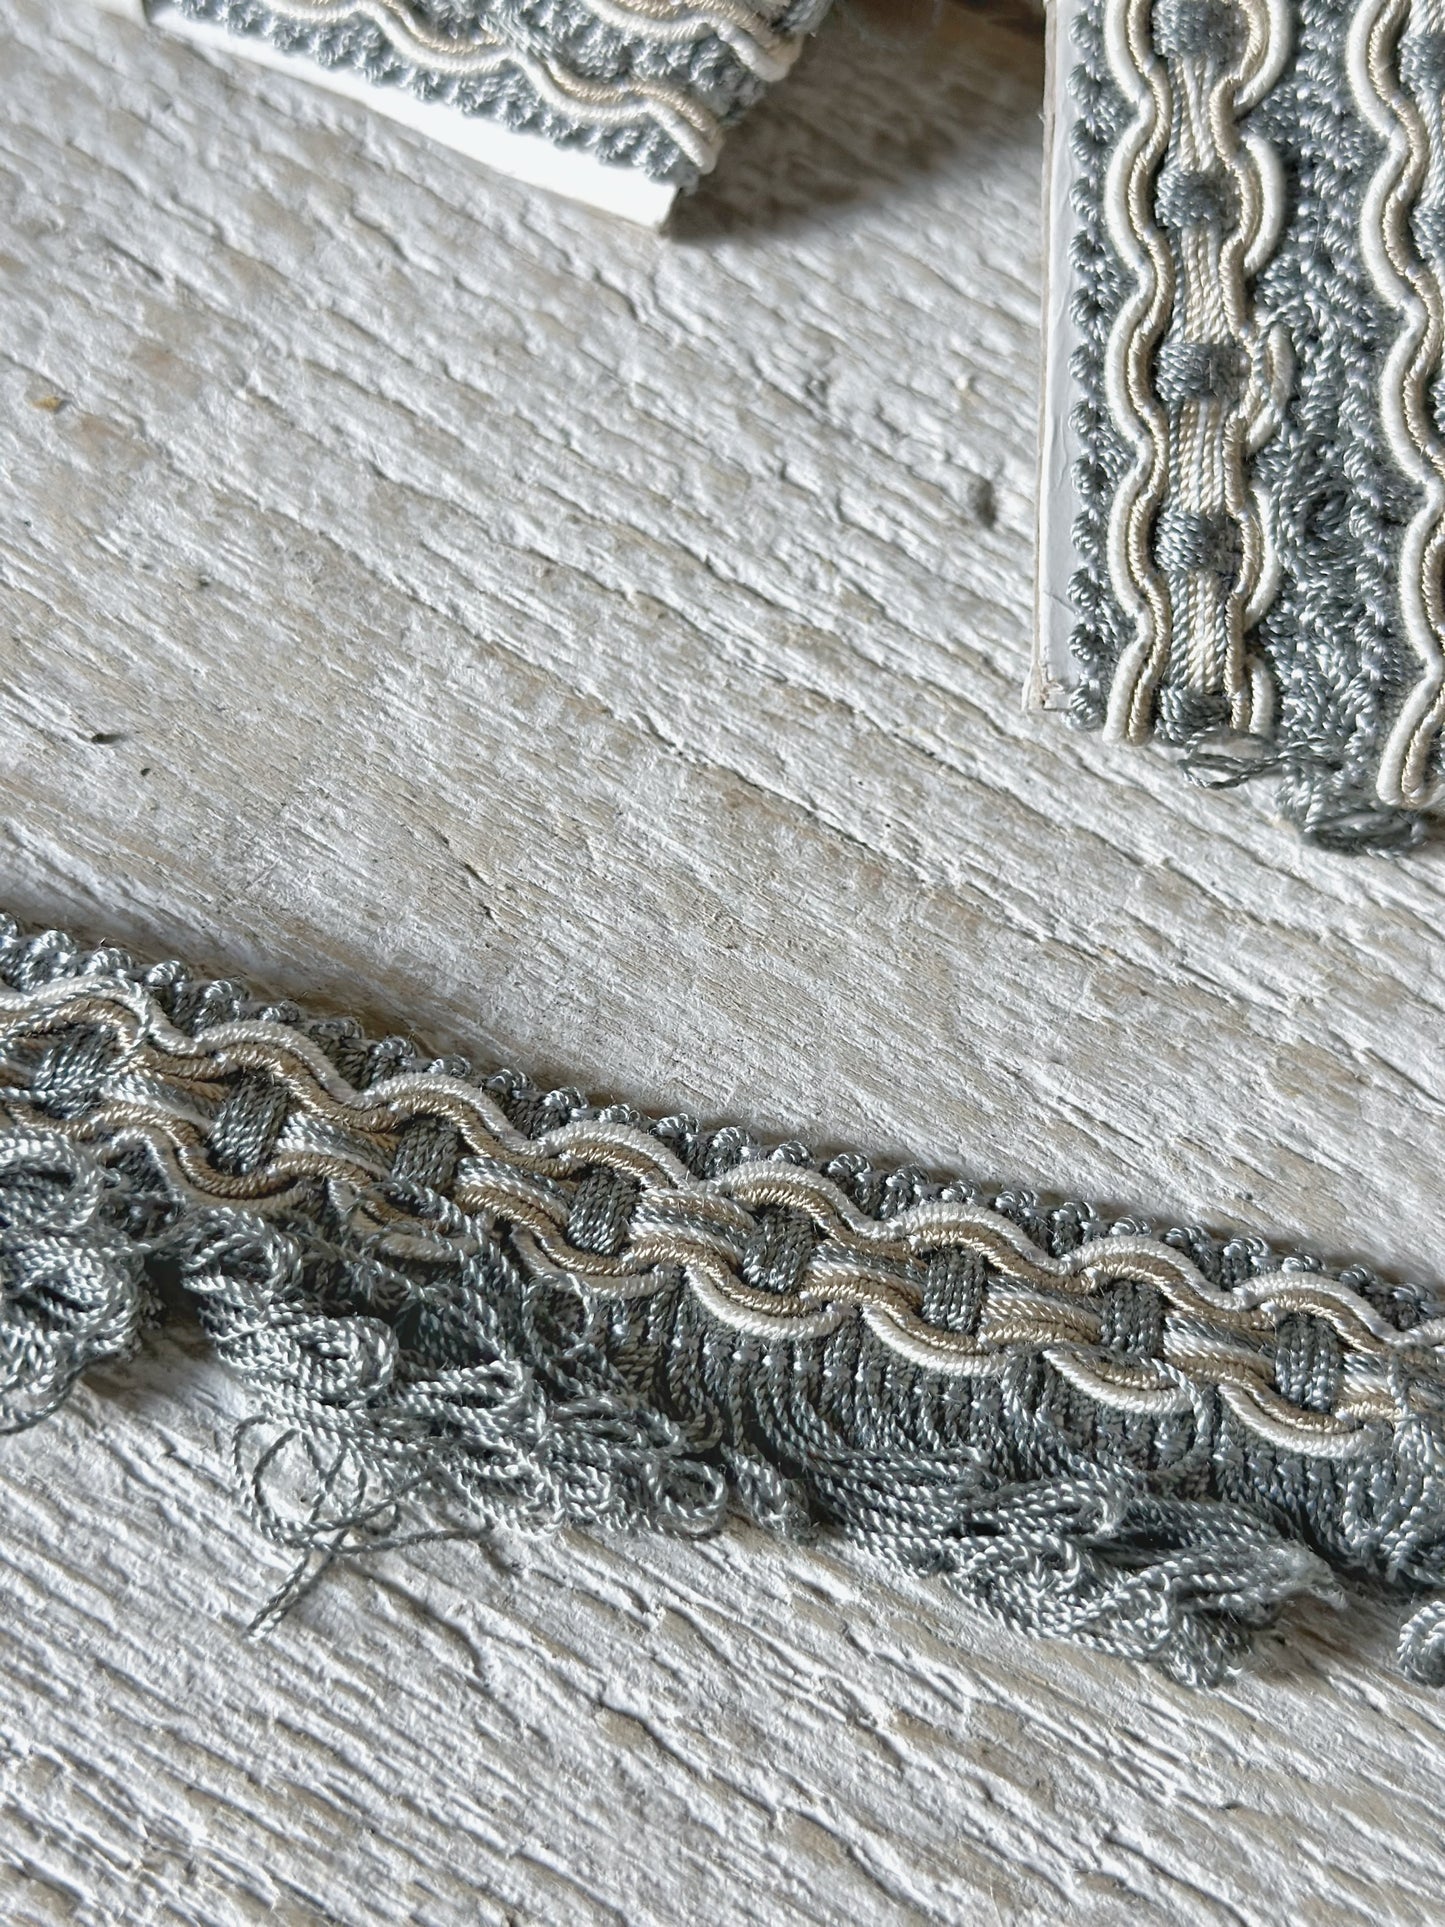 A lovely bundle of vintage trim or passementerie from a French haberdashery